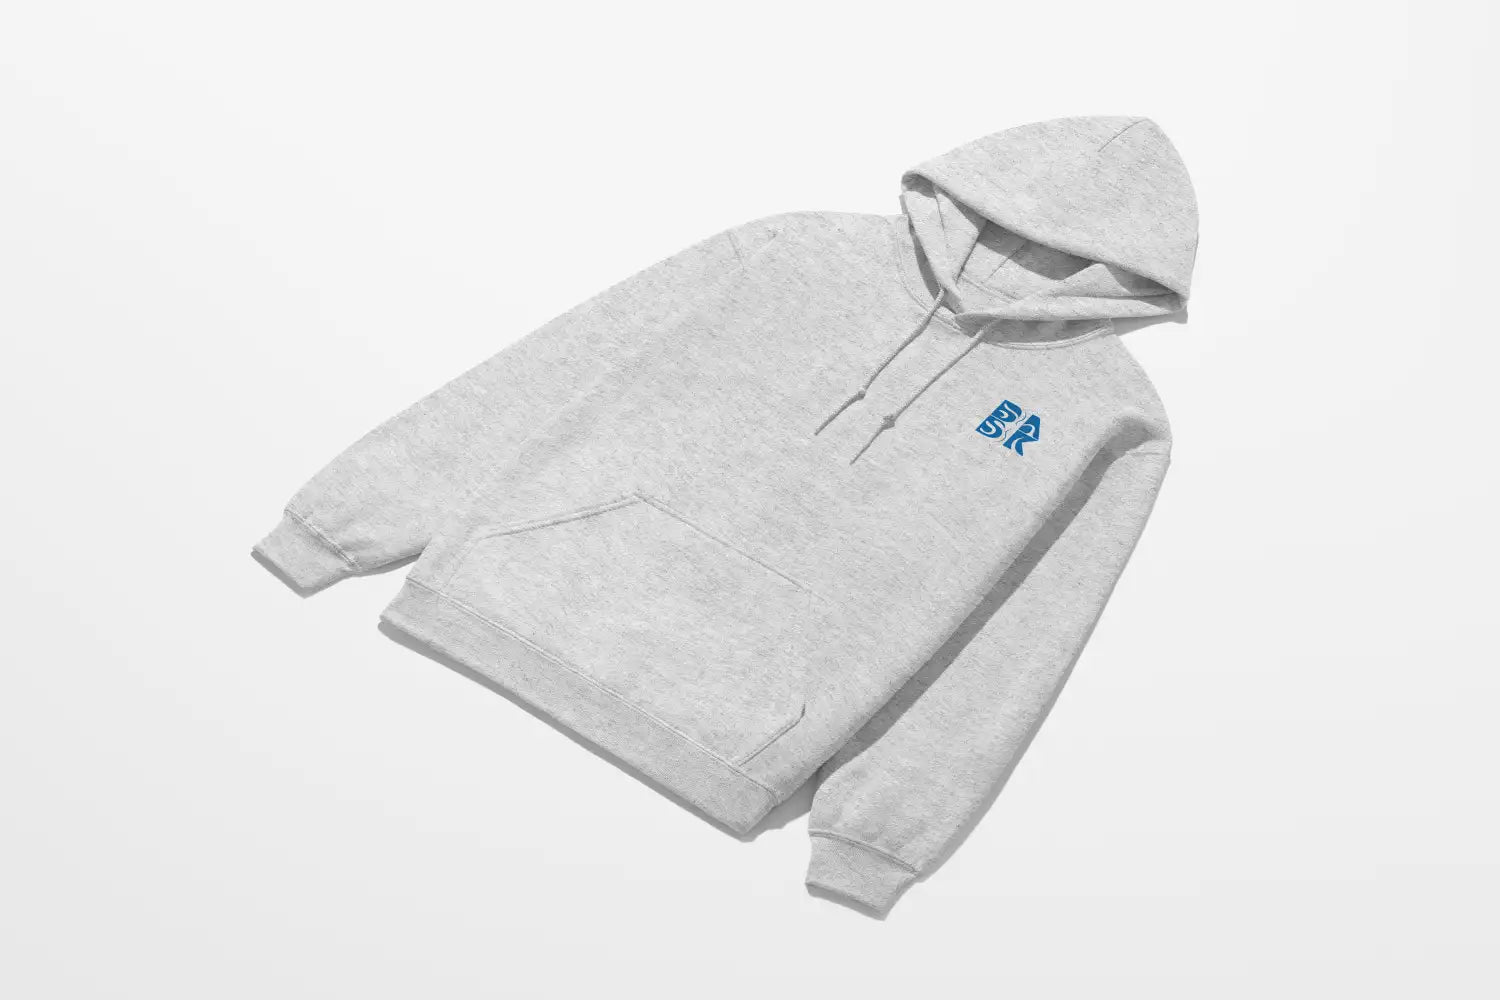 An Kupa'a Tide Hoodie, with a blue logo on it, from the Be Still and Know brand.